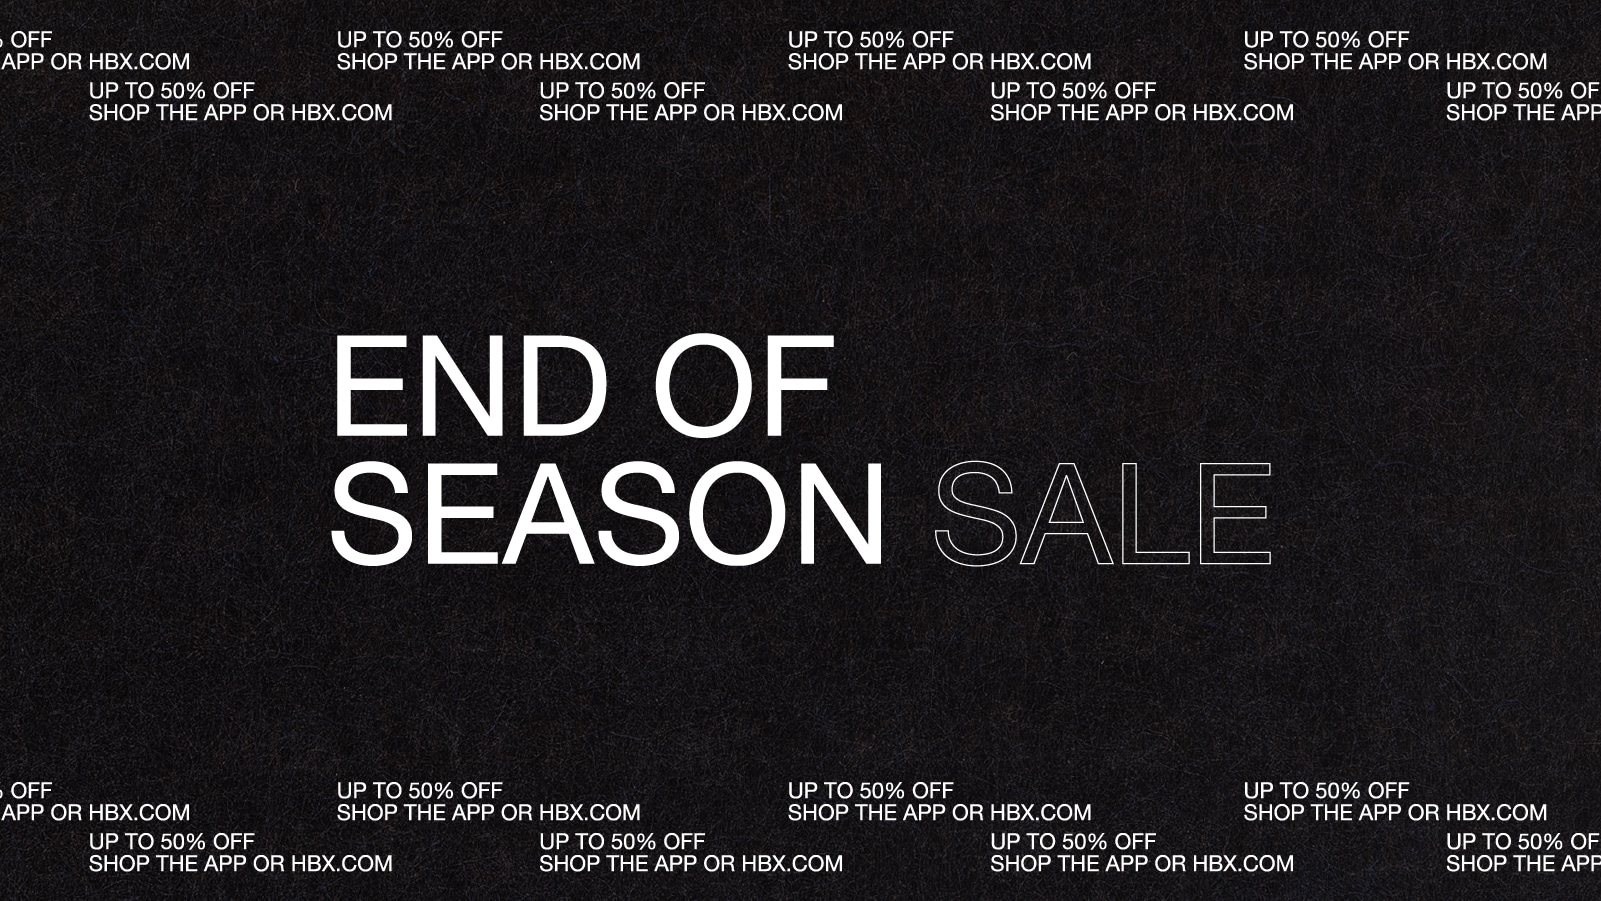 End of Season Sale  Up to 50% Off  